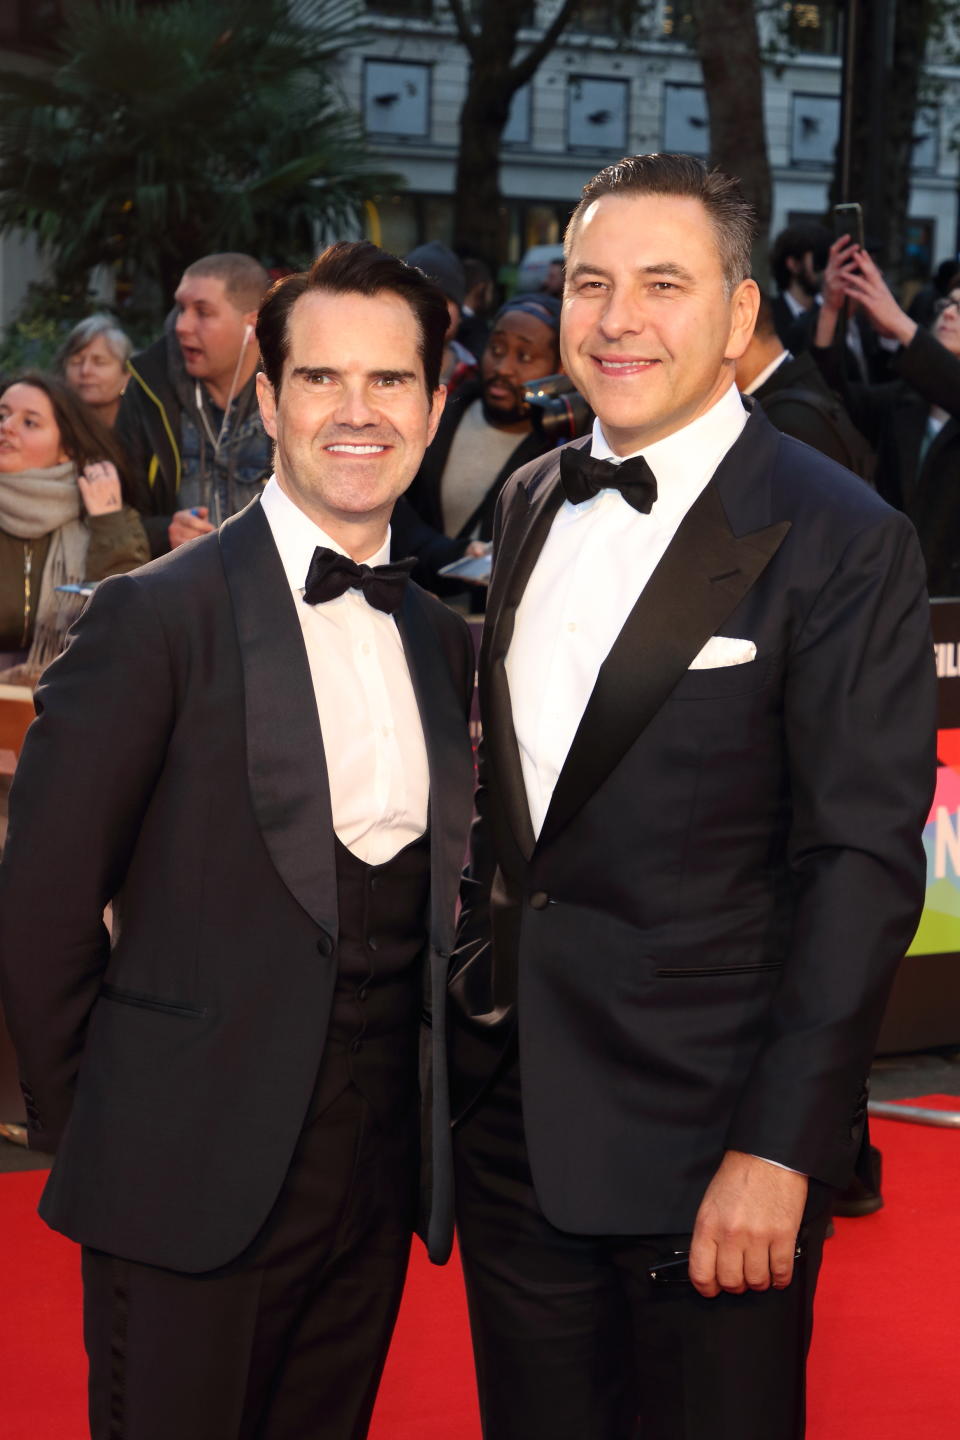 LONDON, UNITED KINGDOM - 2019/10/13: Jimmy Carr and David Walliams attend The Irishman International Premiere and closing Gala during the 63rd BFI London Film Festival at the Odeon Luxe Leicester Square in London. (Photo by Keith Mayhew/SOPA Images/LightRocket via Getty Images)